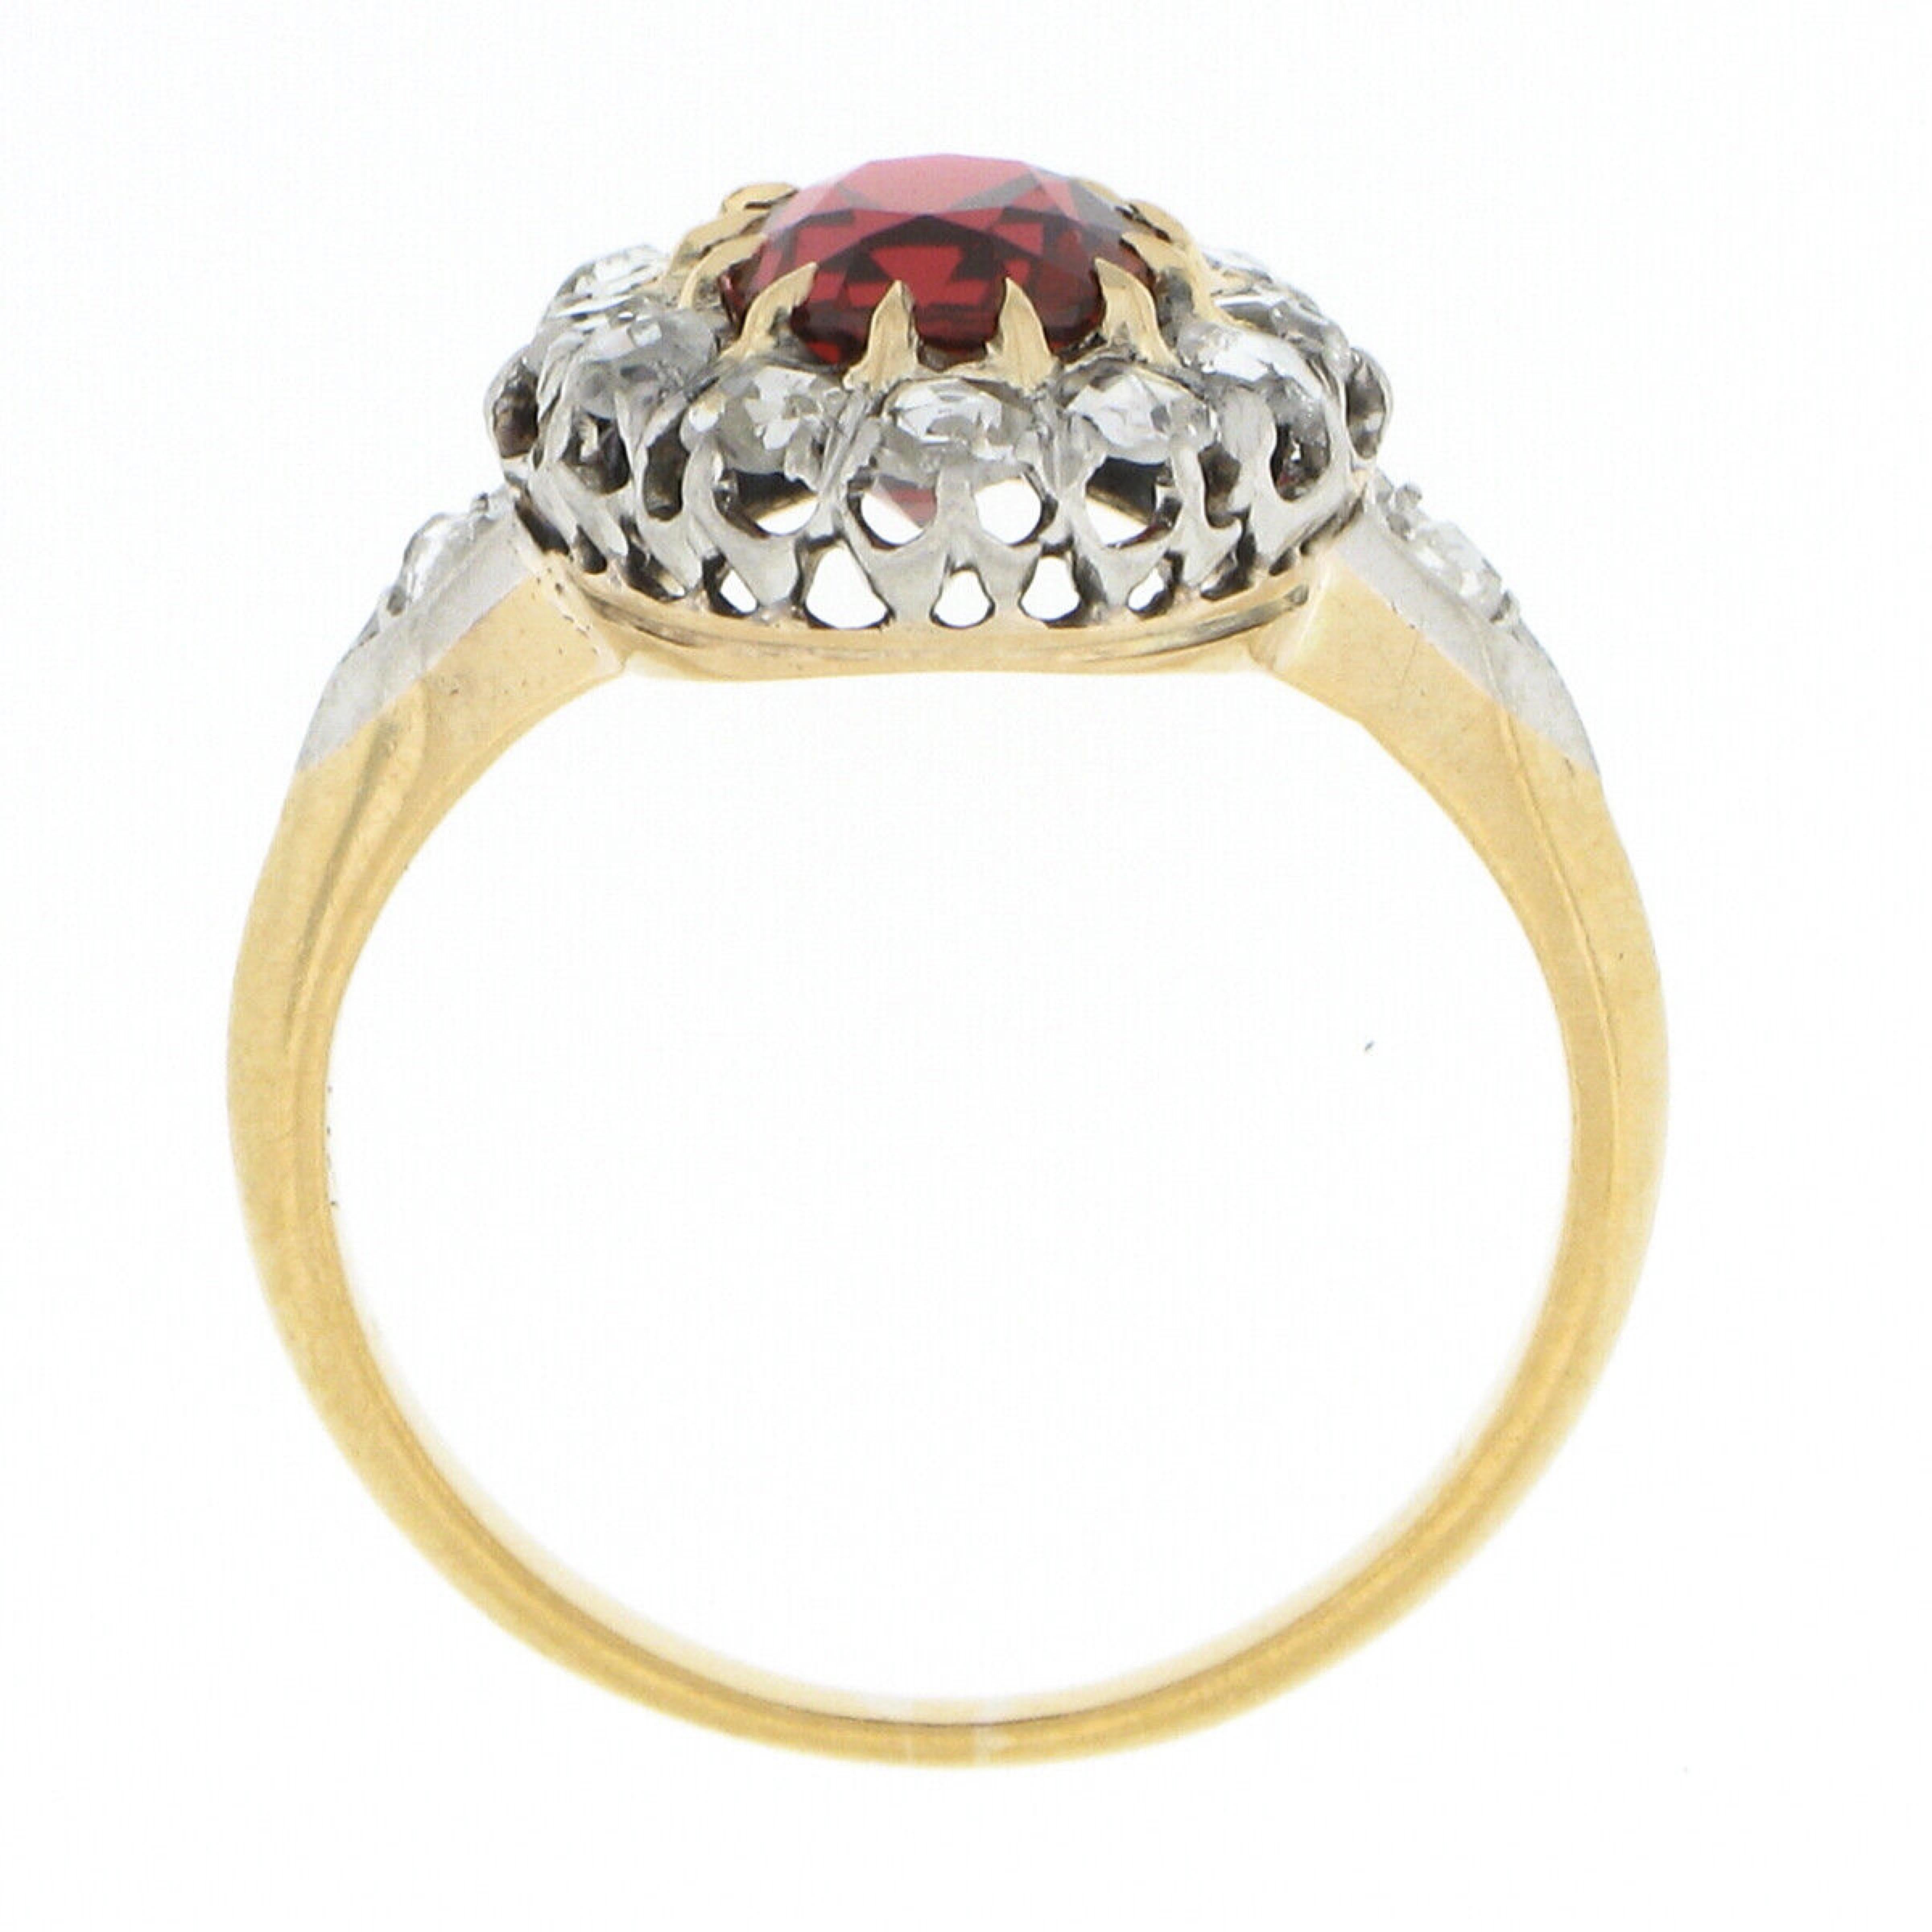 Antique Victorian 18k Gold Platinum GIA BURMA RED Spinel Diamond Halo Ring For Sale 1